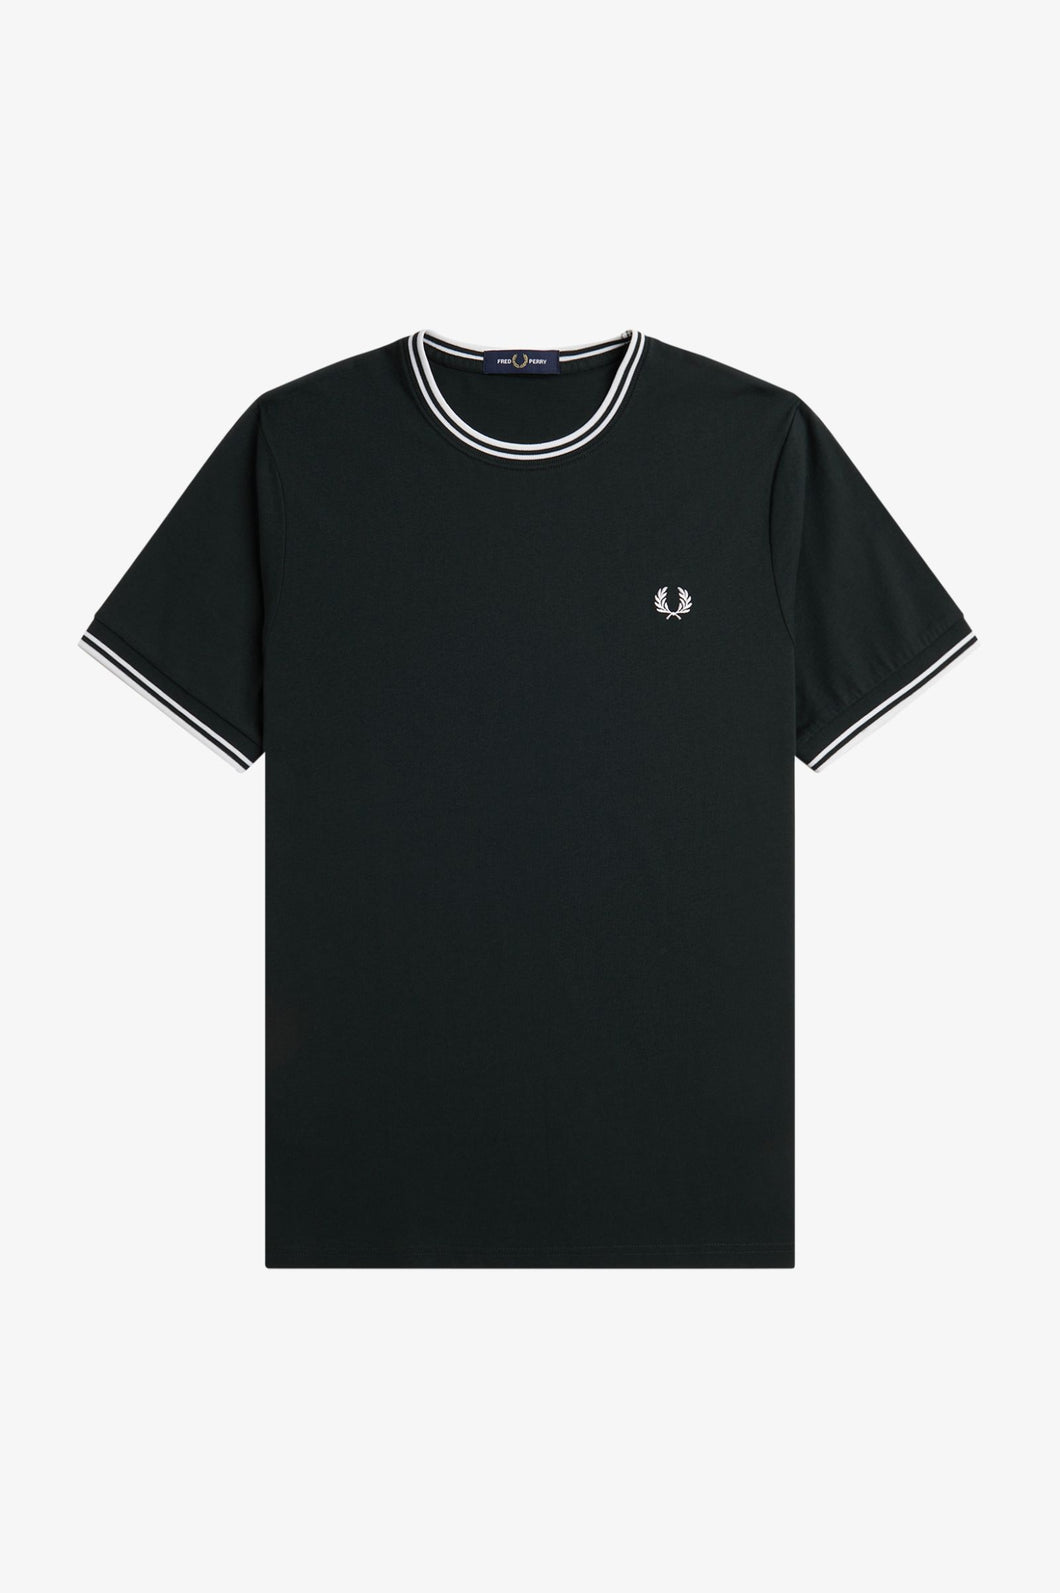 Fred Perry Dark Green Twin Tipped Ringer T-Shirt